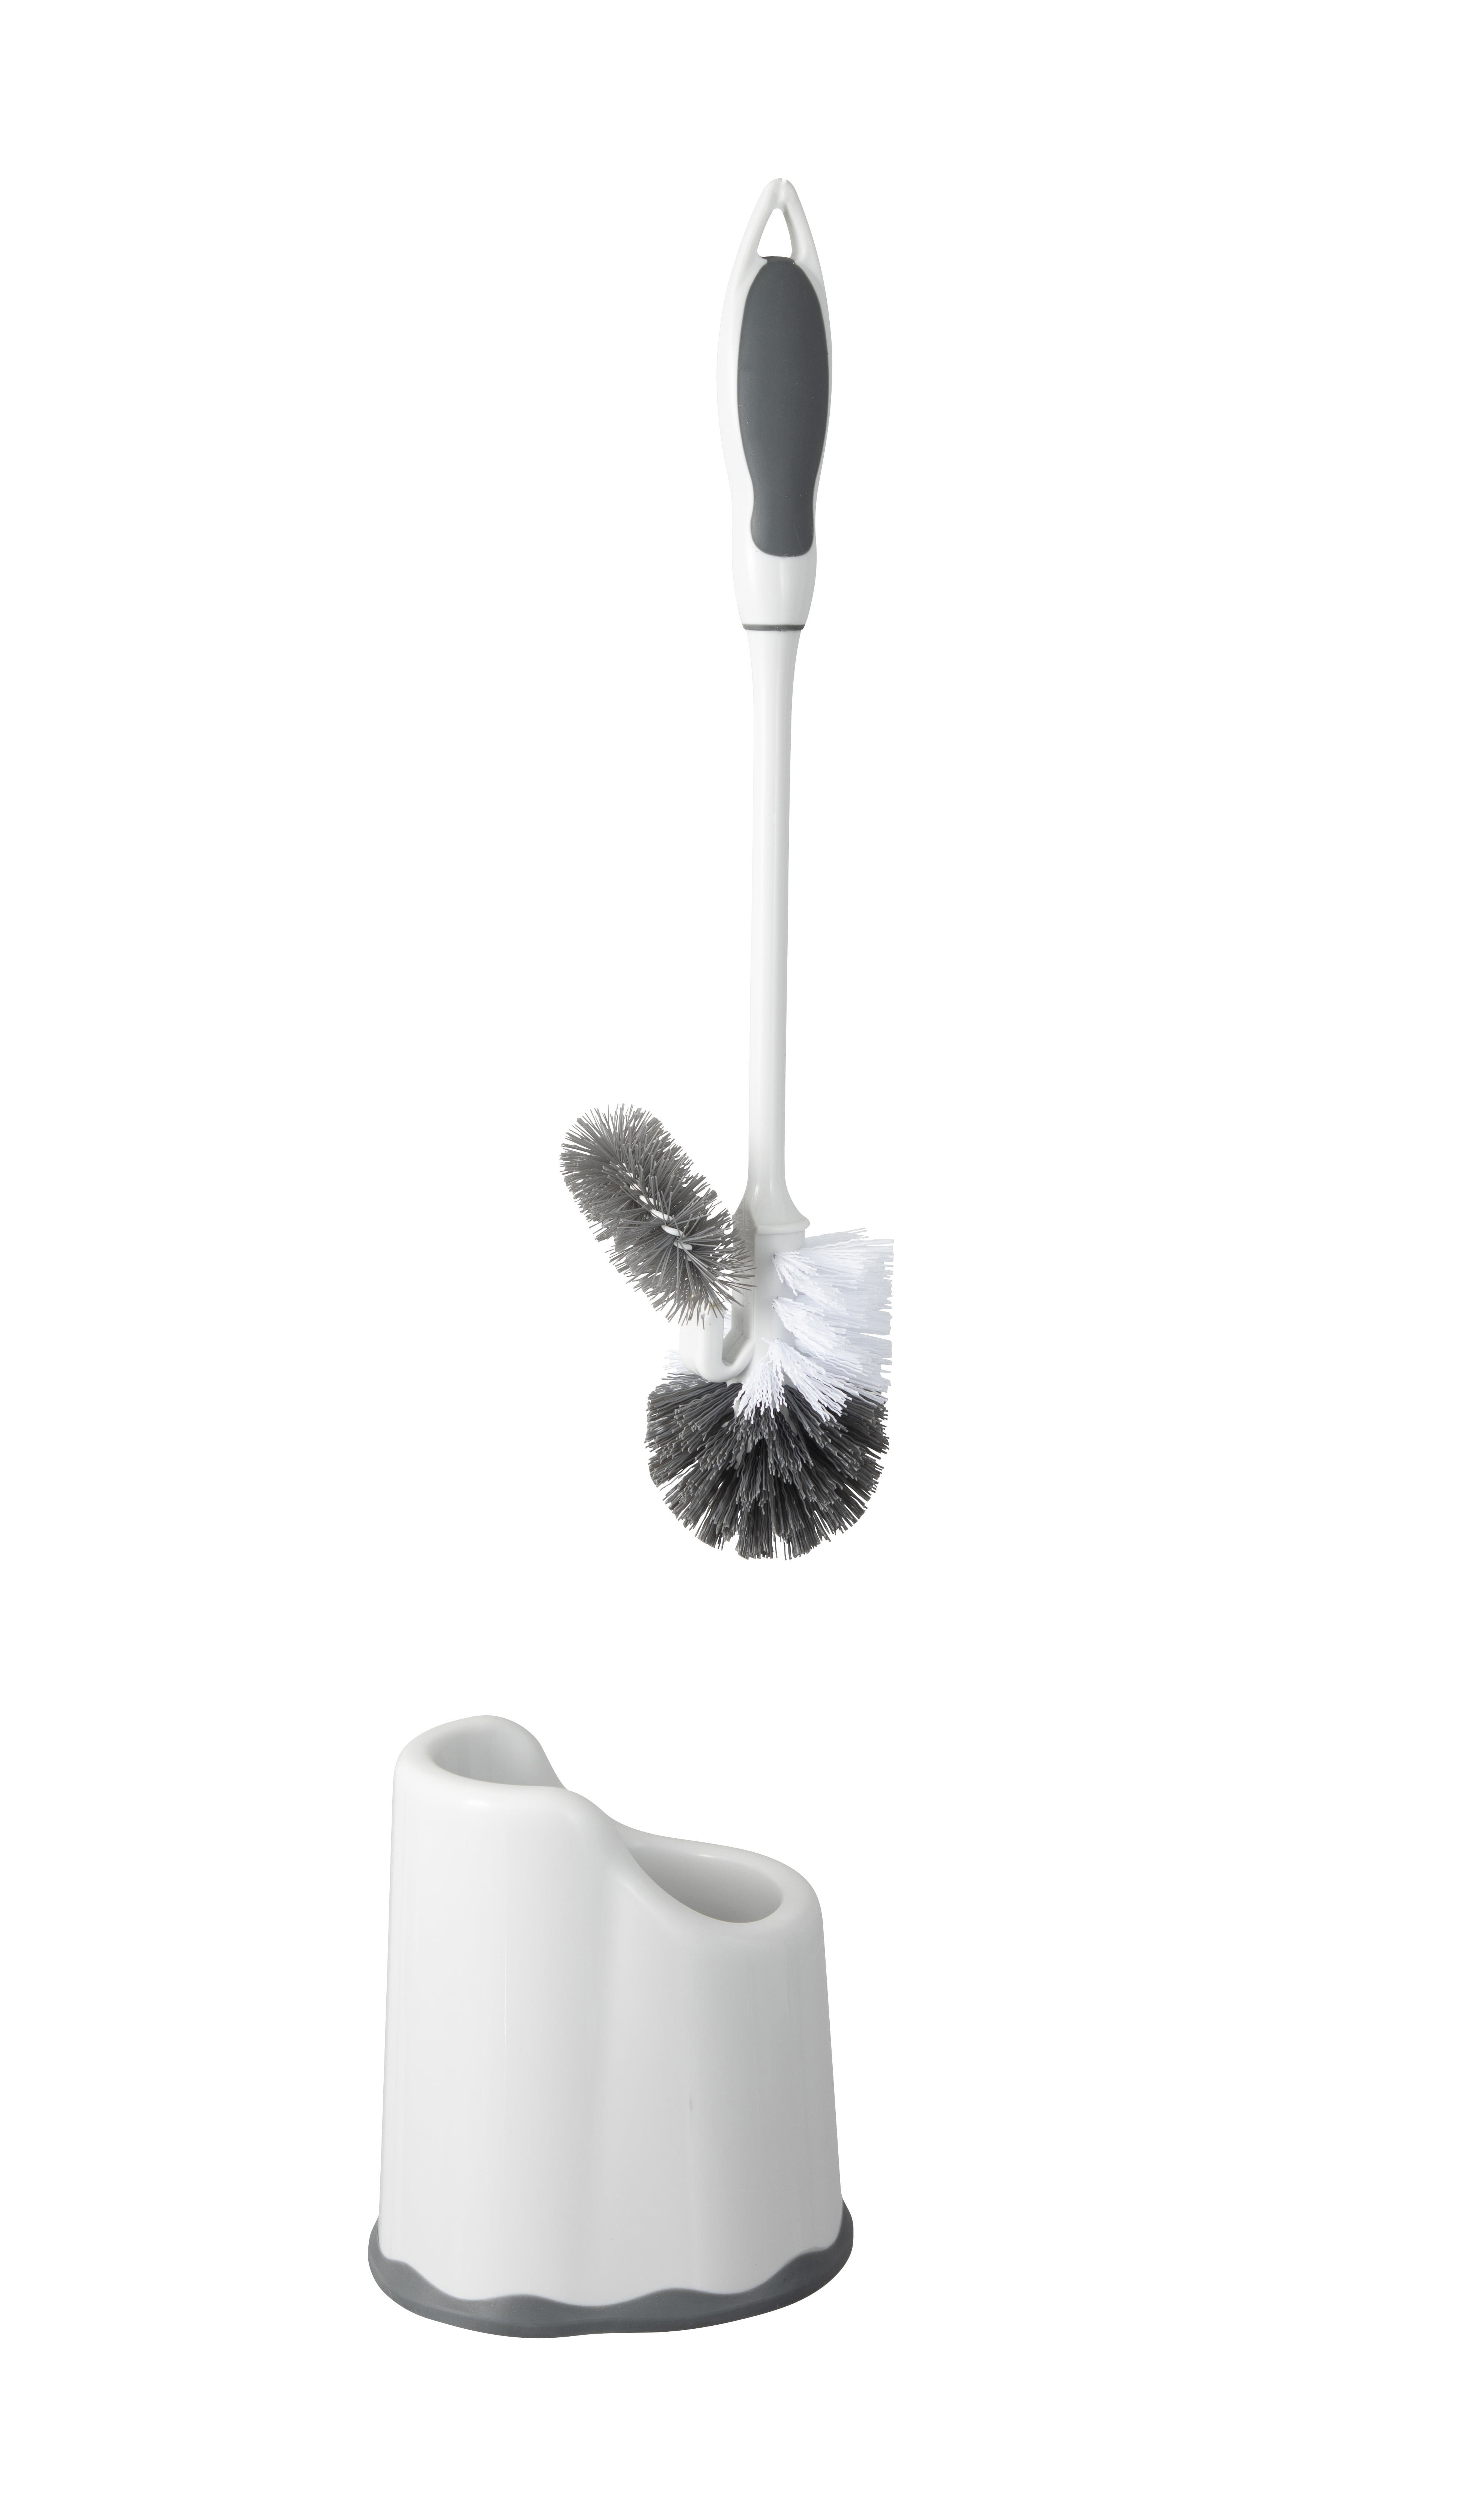 Dependable Industries Toilet Bowl Brush with Rim Cleaner and Holder Set  Toilet Bowl Cleaning System with Scrubbing Wand, Under Rim Lip Brush and